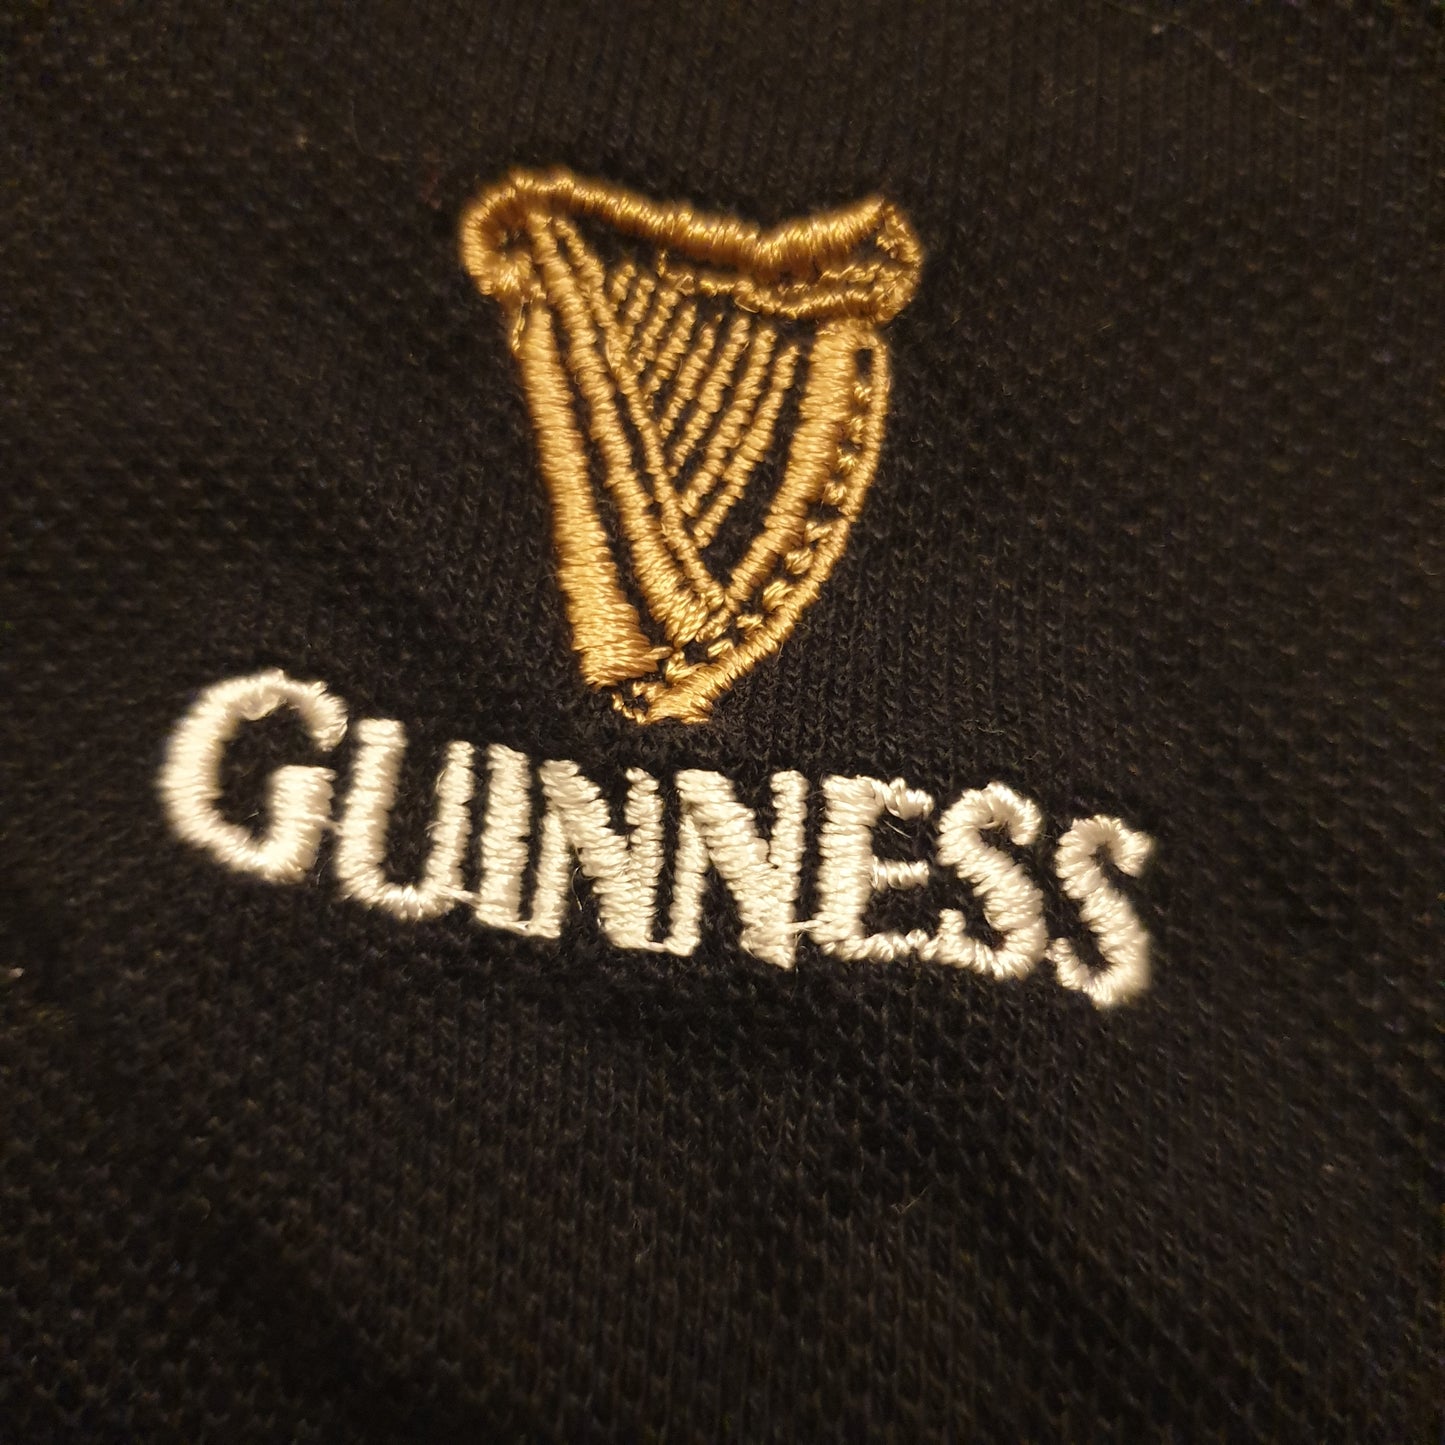 Guinness Beer Polo 5XL